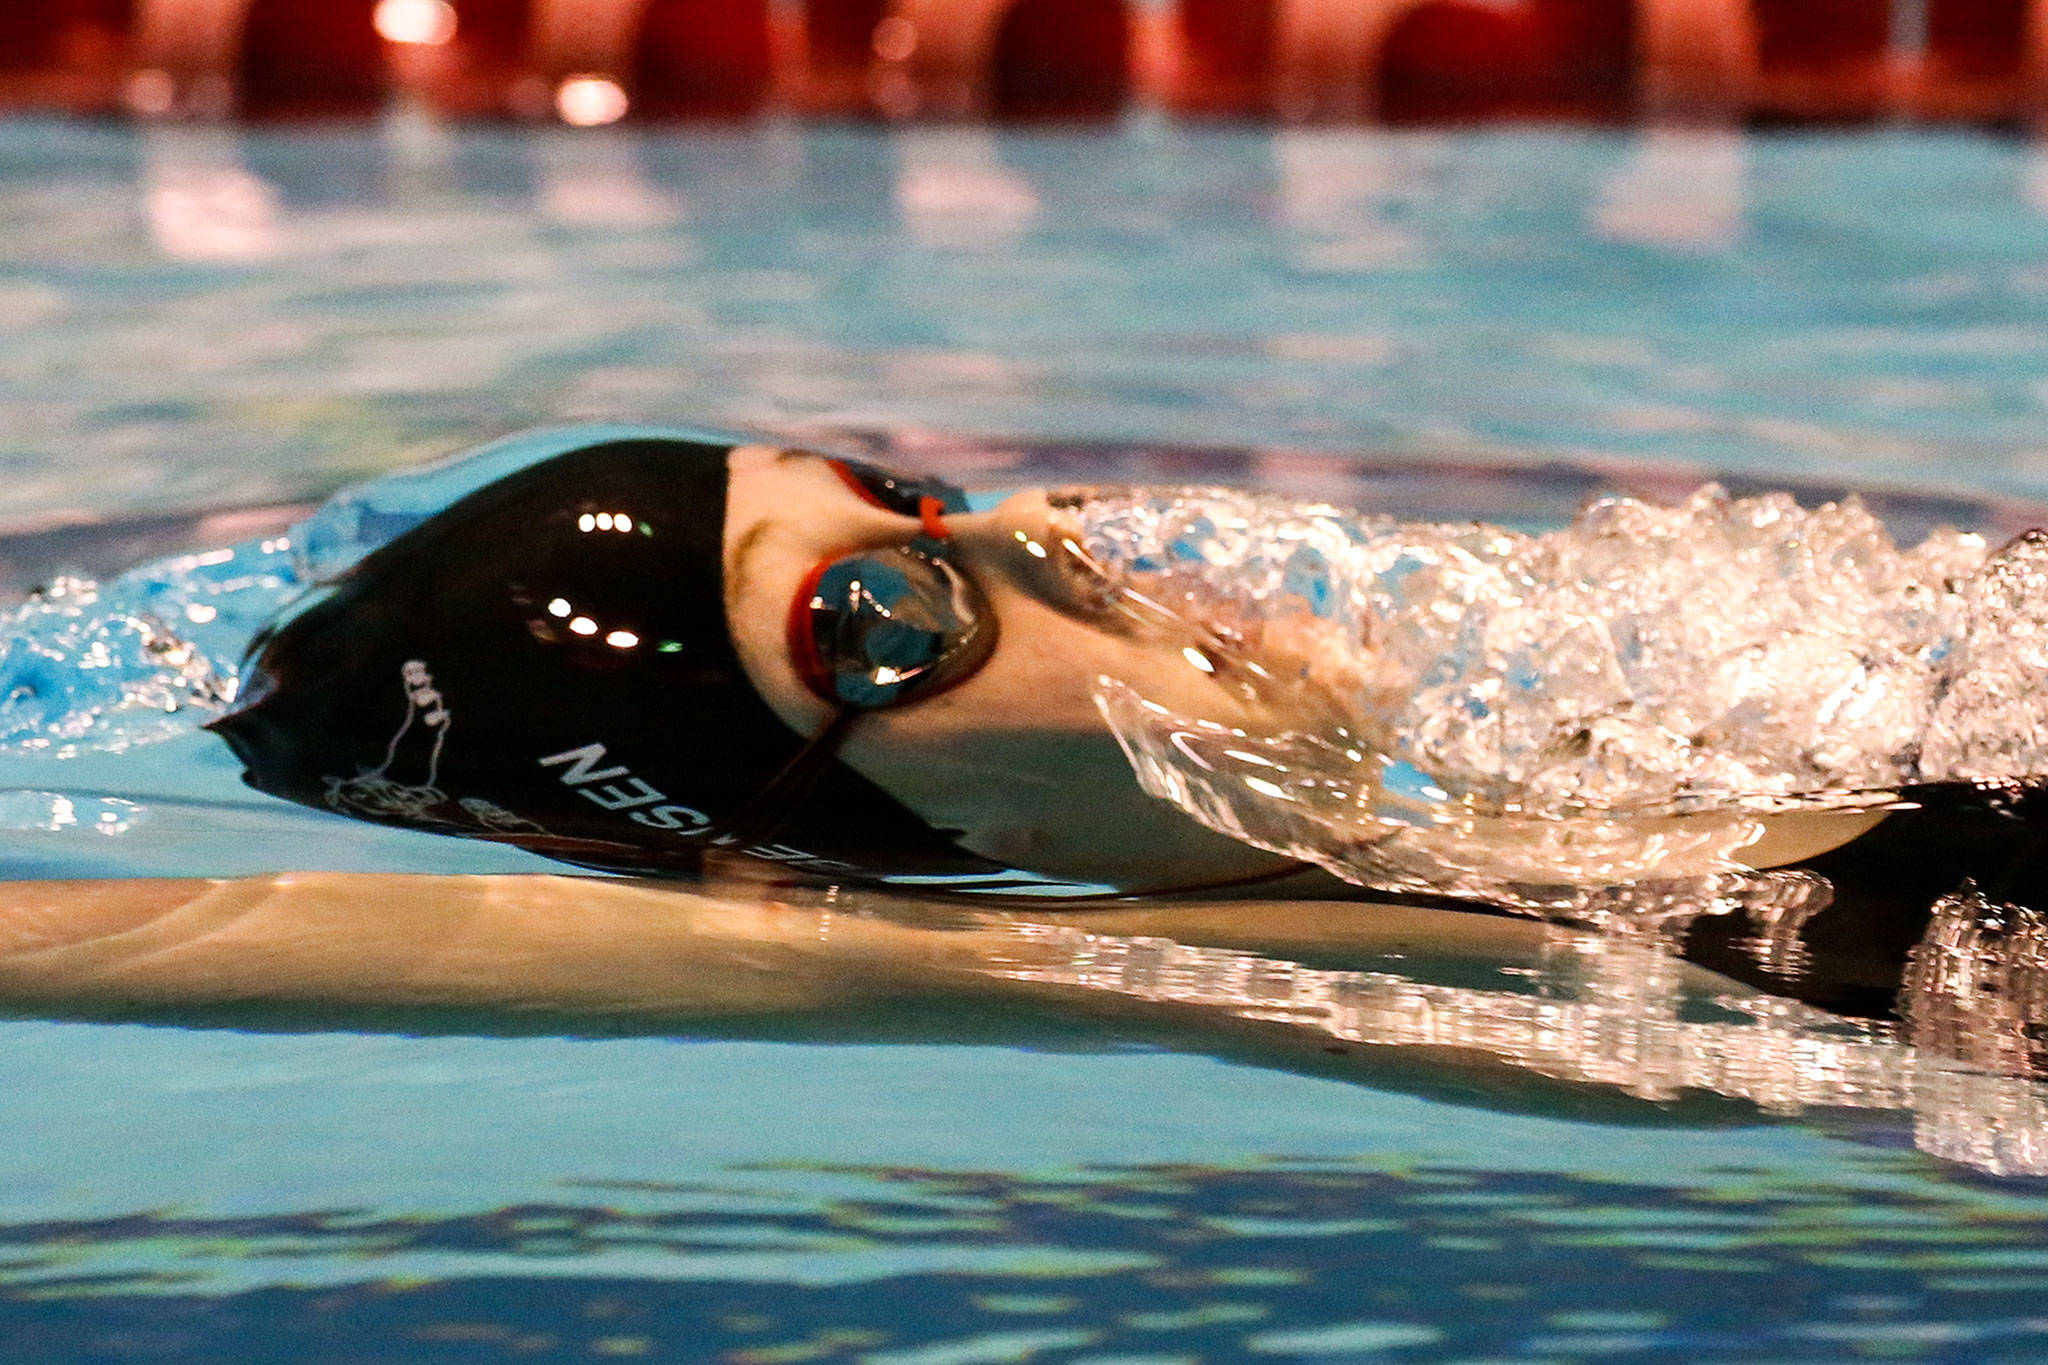 Snohomish’s Kendall Bensen competes in the 100-yard backstroke during the Class 3A Girls Swim & Dive Championship at King County Aquatics Center in Federal Way on Nov. 16, 2019. (Kevin Clark / The Herald)